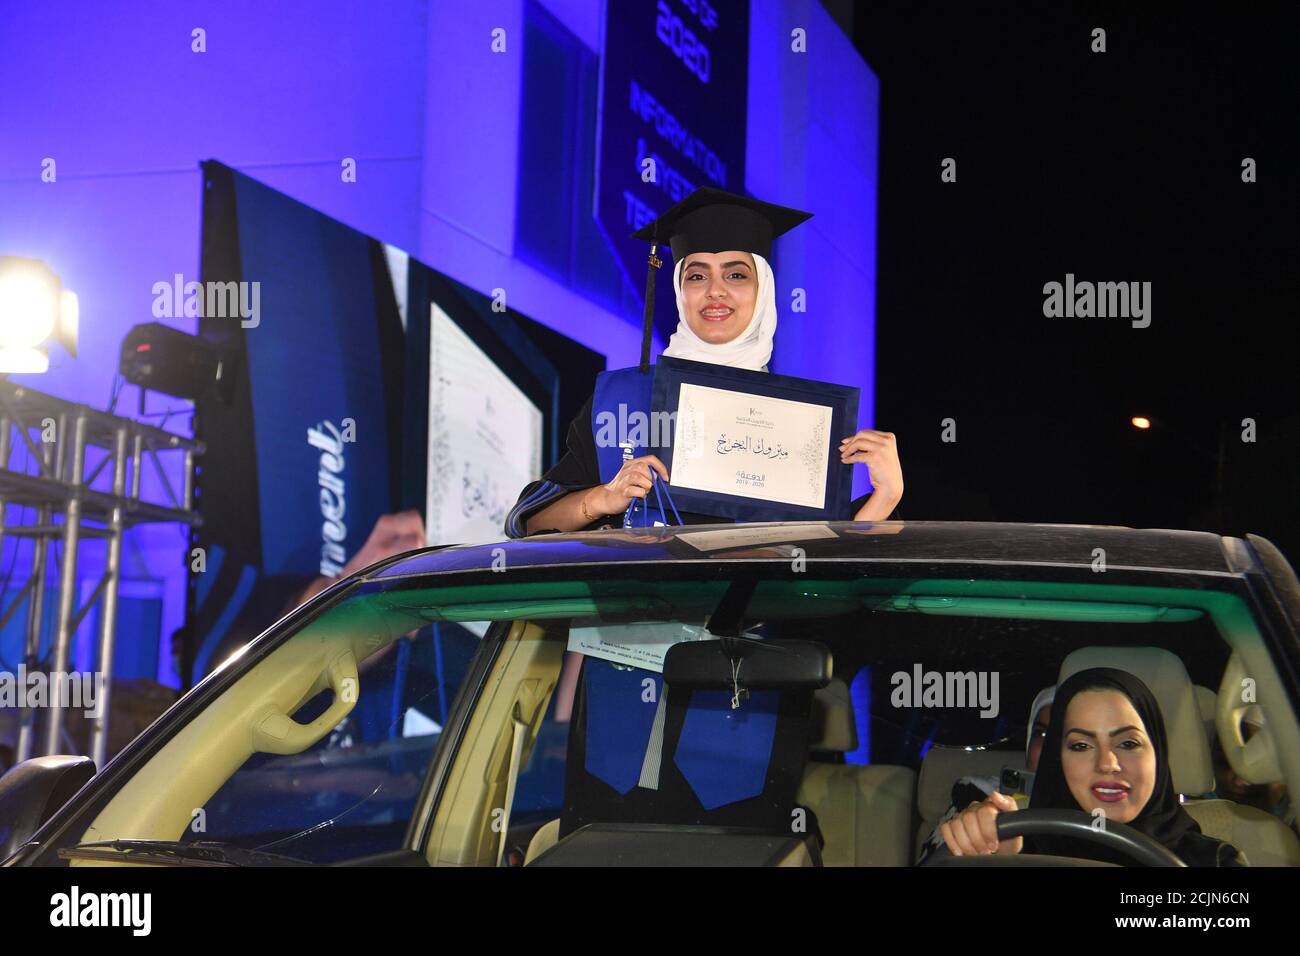 (200915) --  AHMADI GOVERNORATE, Sept. 15, 2020 (Xinhua) -- A student shows a diploma during a drive-through graduation ceremony at Kuwait Technical College (K-Tech) in Ahmadi Governorate, Kuwait, Sept. 9, 2020.  Kuwait Technical College (K-Tech) celebrated its students' graduation in the first of its kind drive-through ceremony.    More than 125 students gathered in the university's parking lot to receive their degree while driving-through to the president and keeping social distancing protocols in place.    TO GO WITH 'Feature: Kuwaiti students celebrate graduation with drive-through, virtua Stock Photo